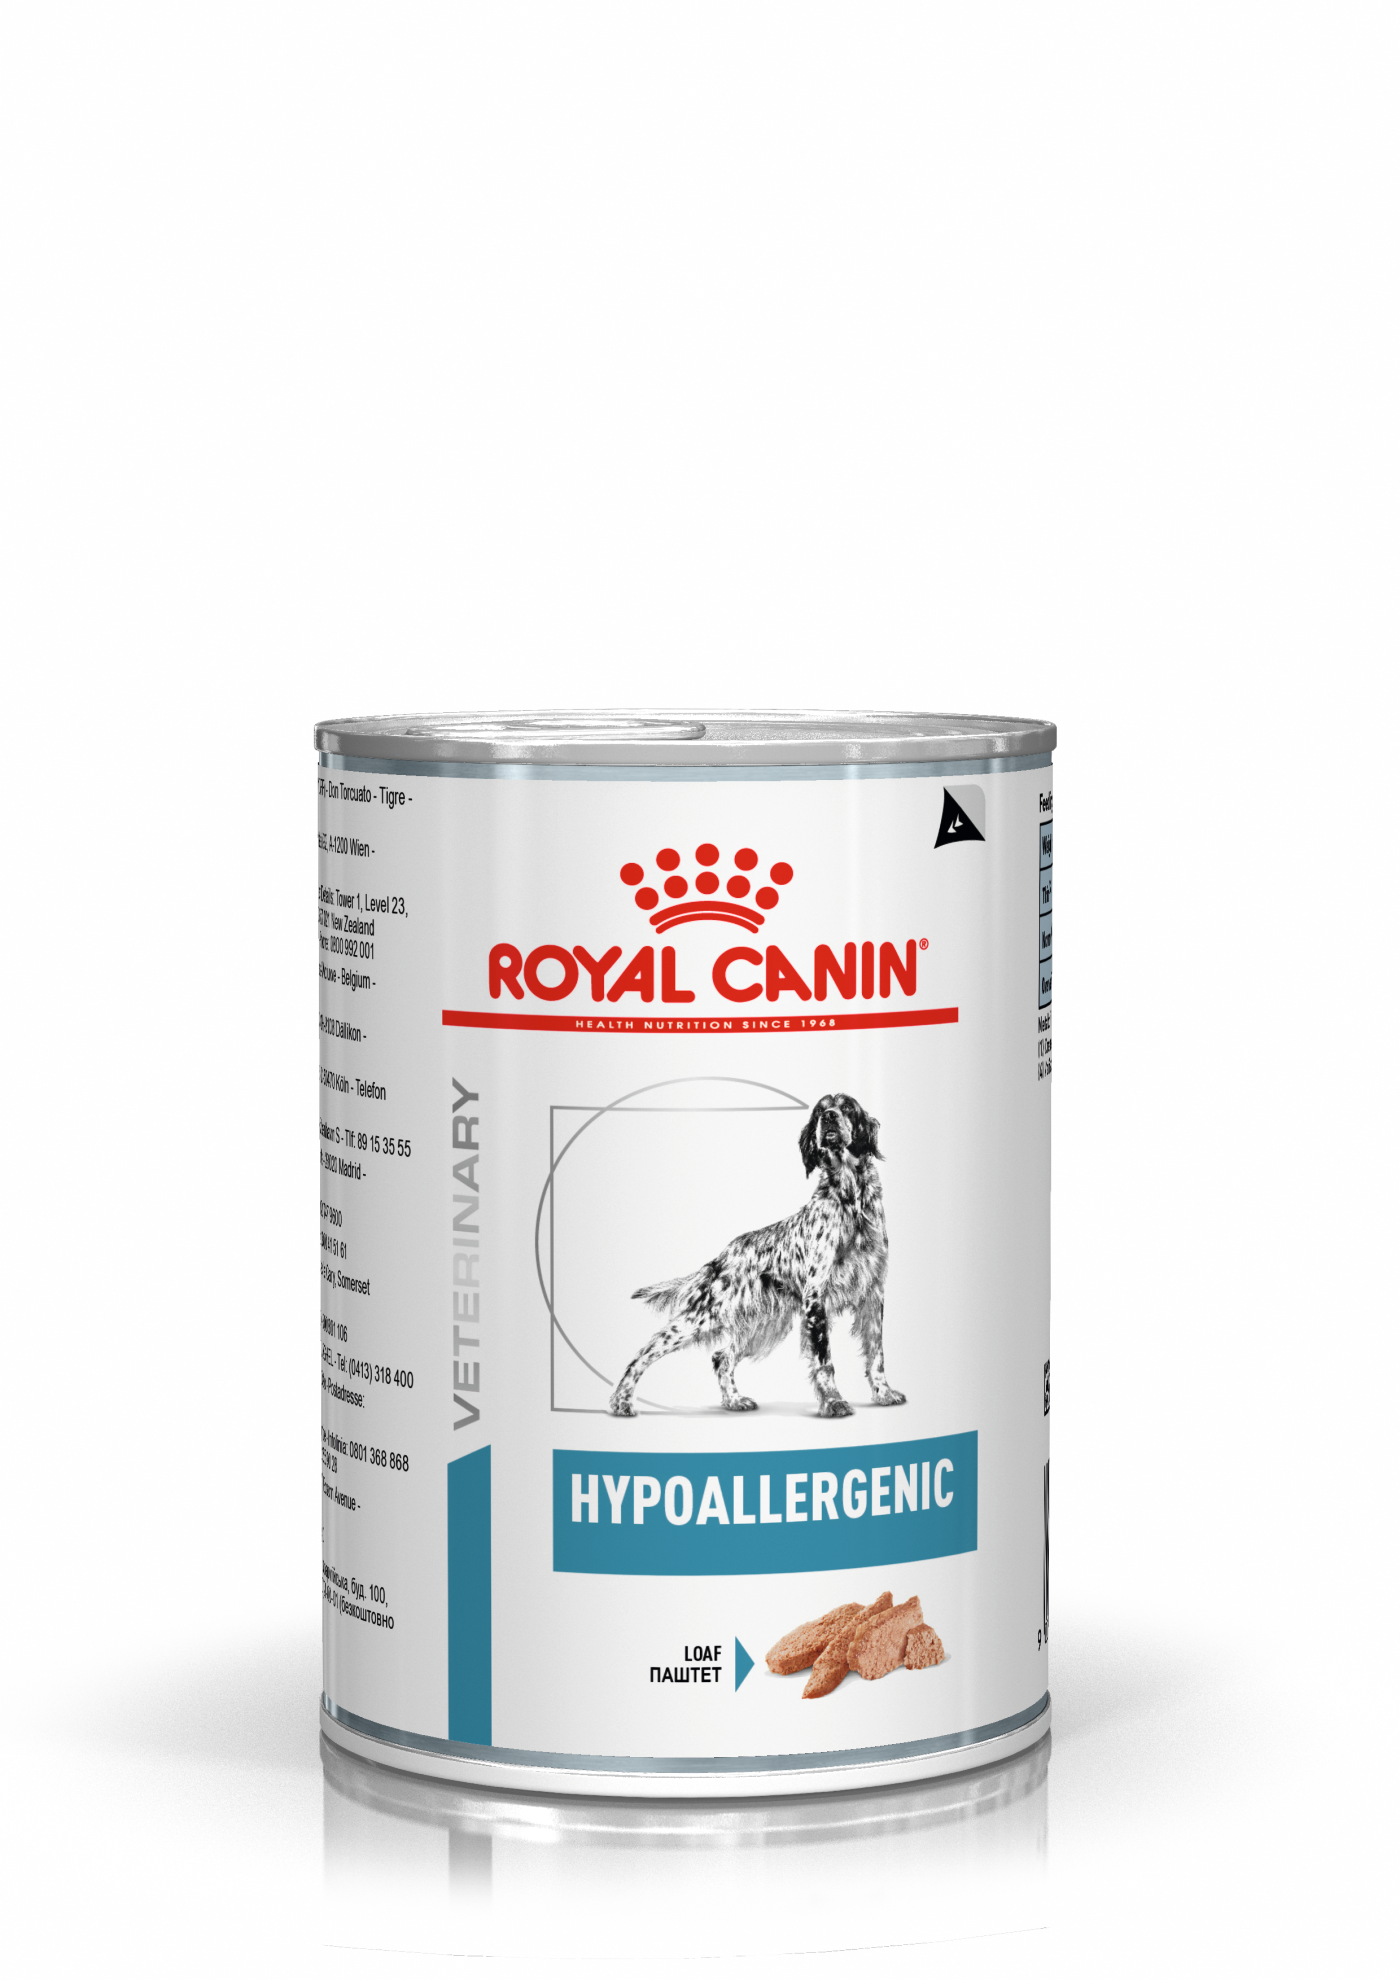 HYPOALLERGENIC Wet - Royal Canin